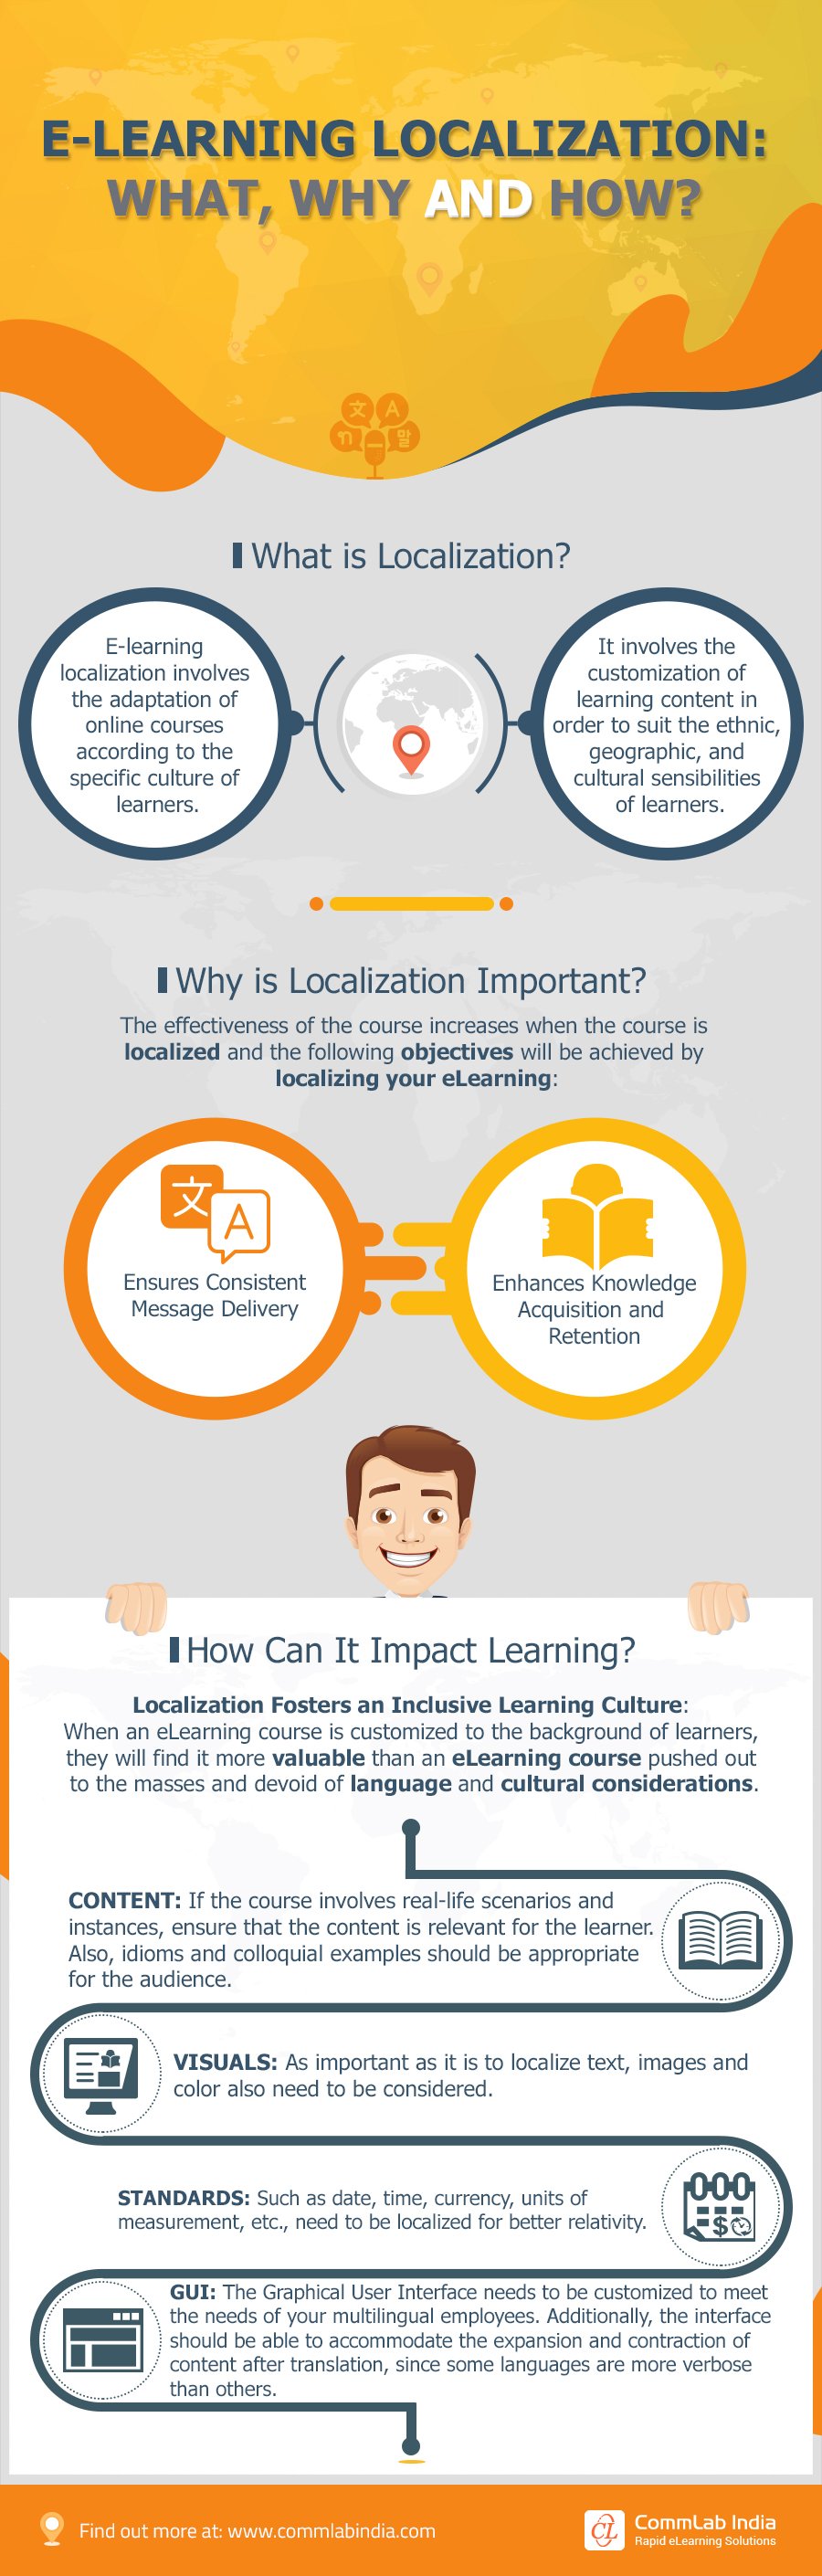 eLearning Localization: What, Why and How? [Infographic]